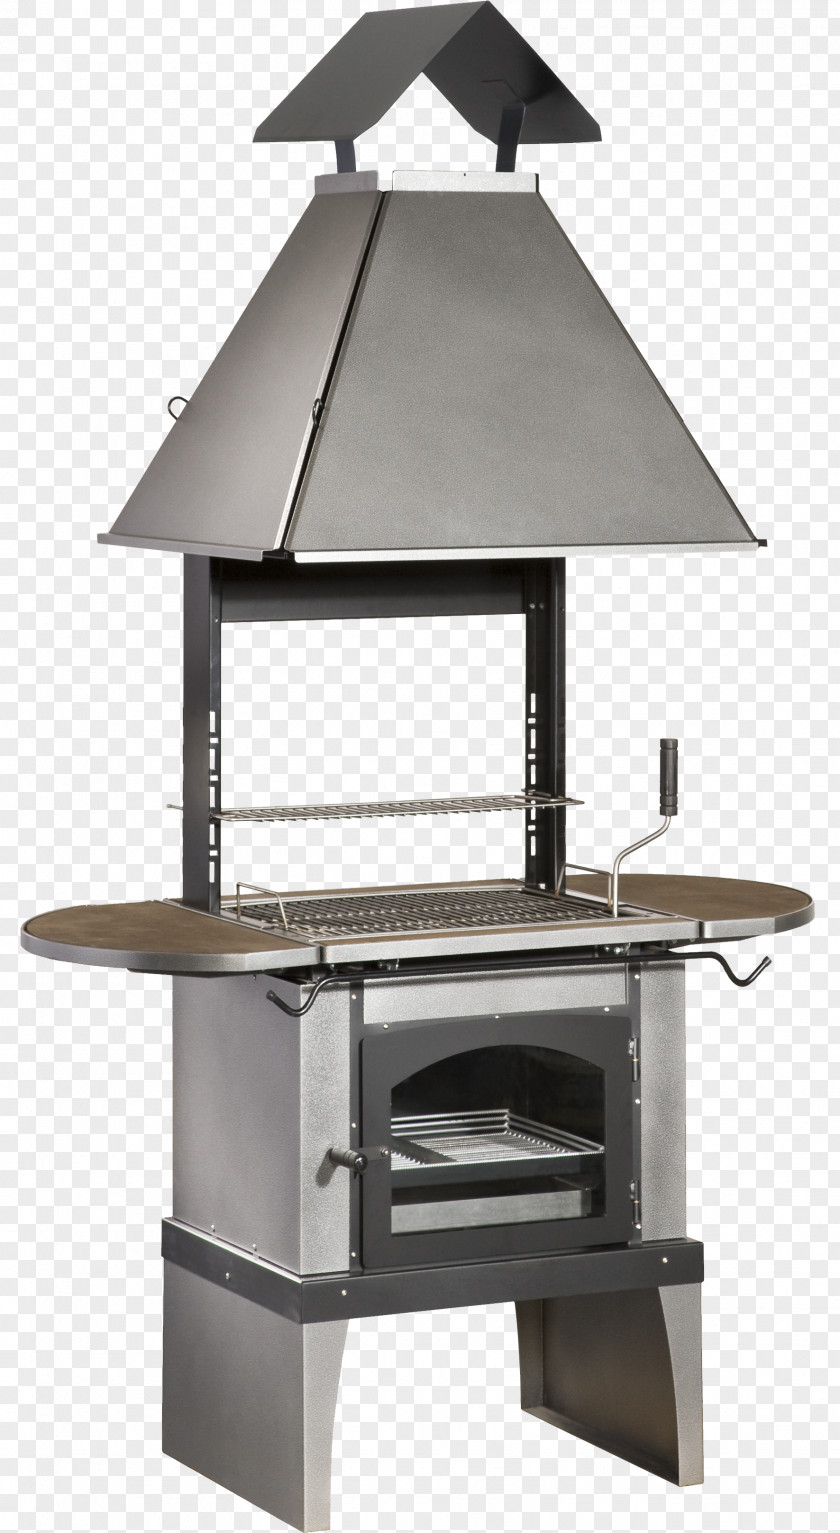 Barbecue Hearth Steel Finland Smoking PNG